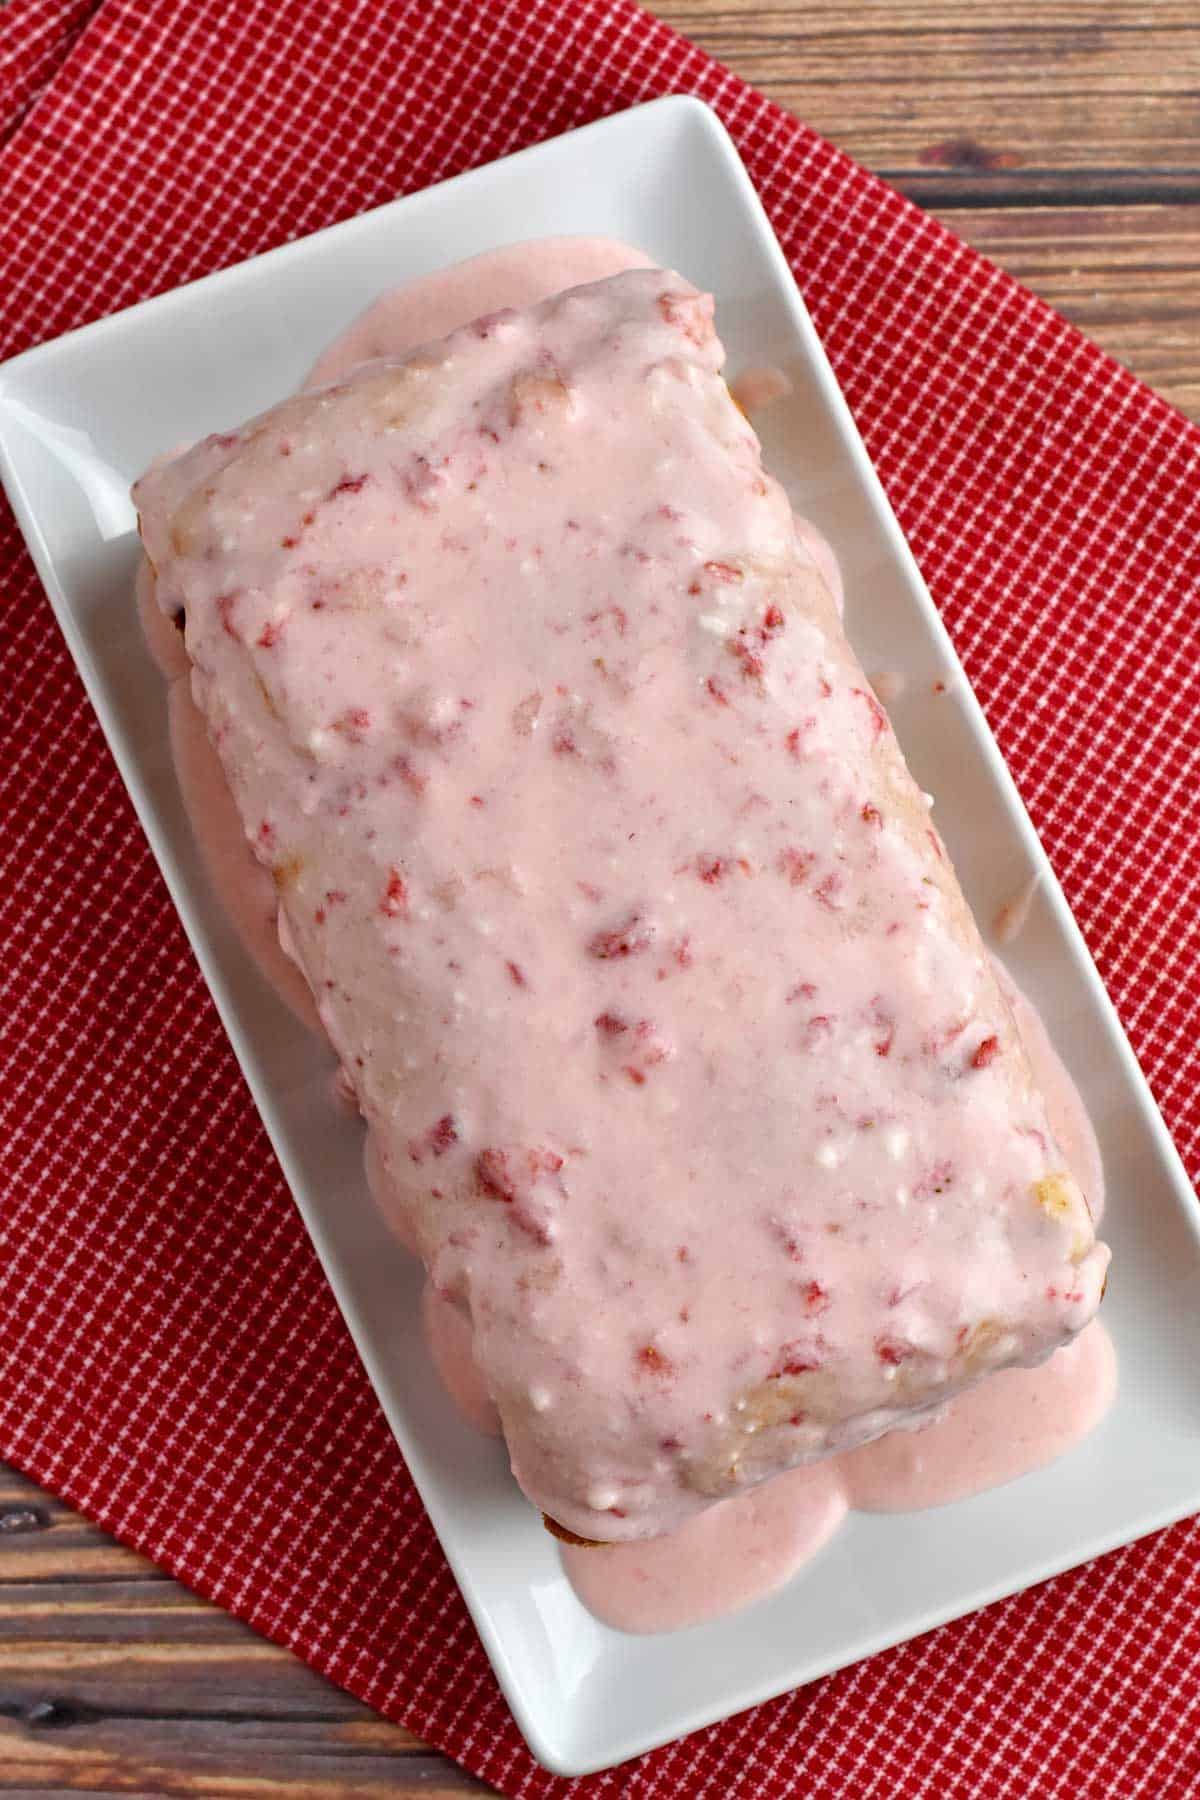 Glazed gluten free strawberry bread on white serving platter placed on red and white checkered kitchen towel.